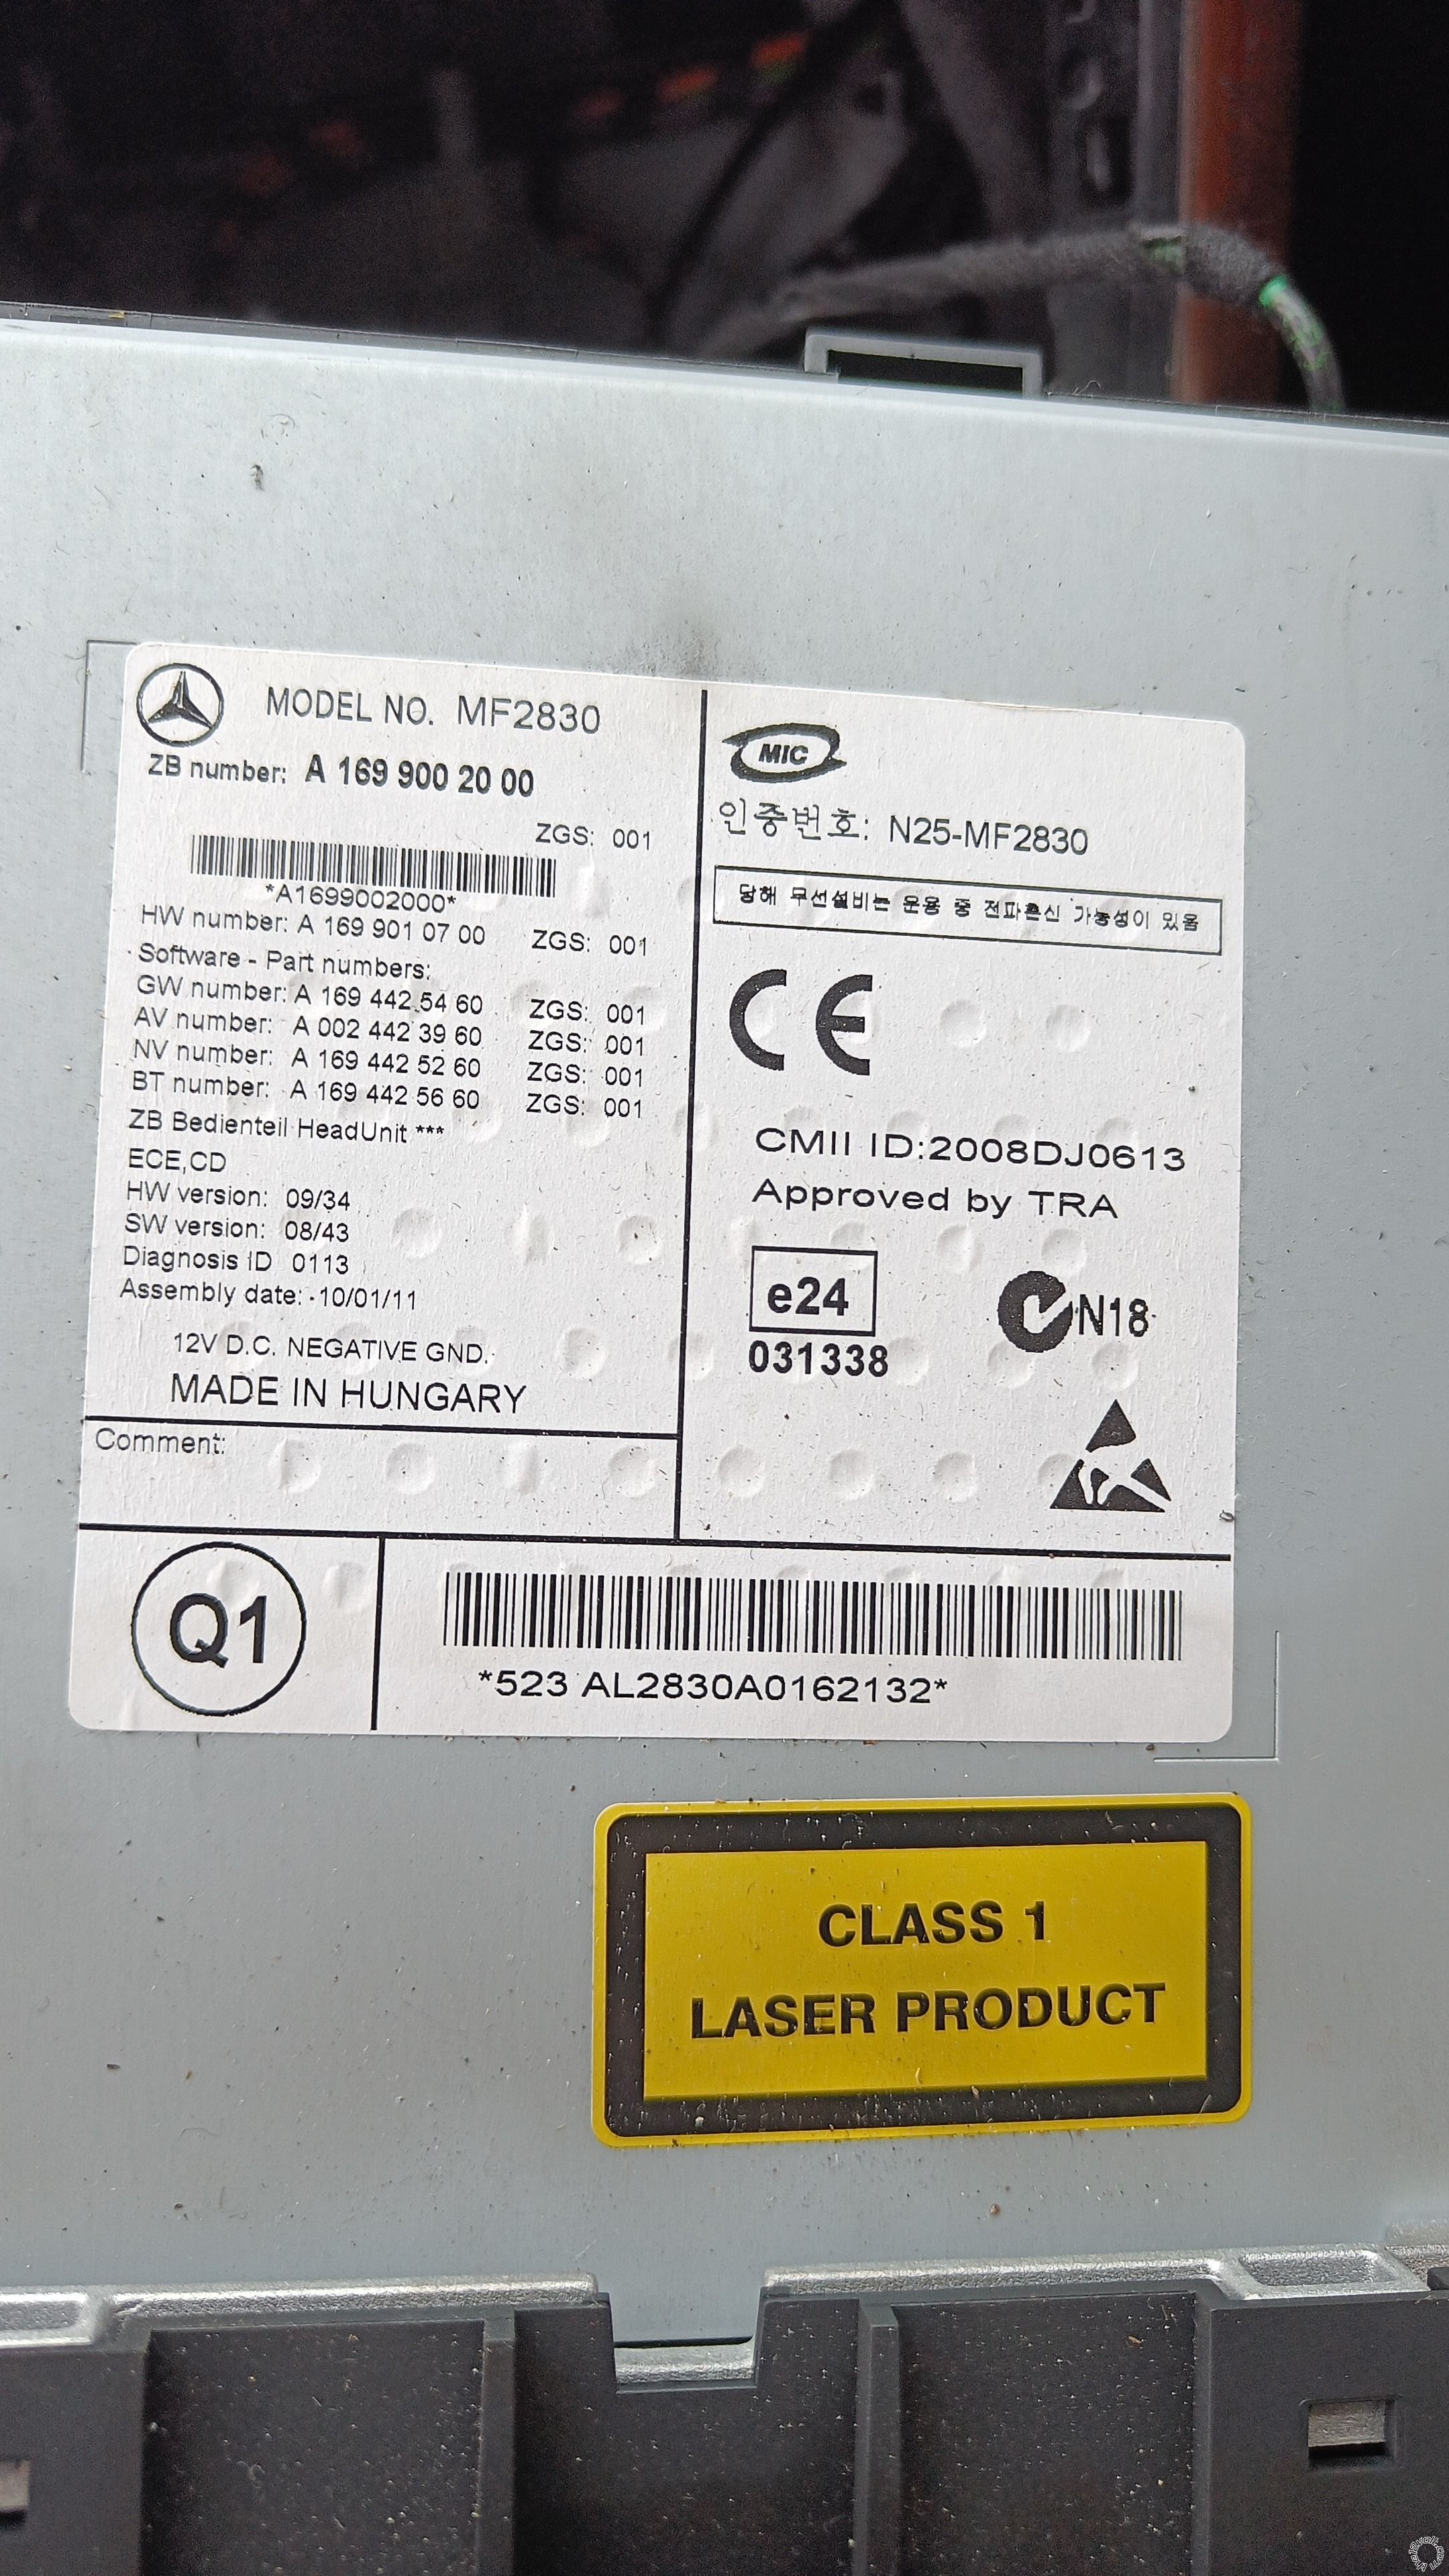 2010 Mercedes Benz A Class, MF2830 Stock Unit Wiring? - Last Post -- posted image.